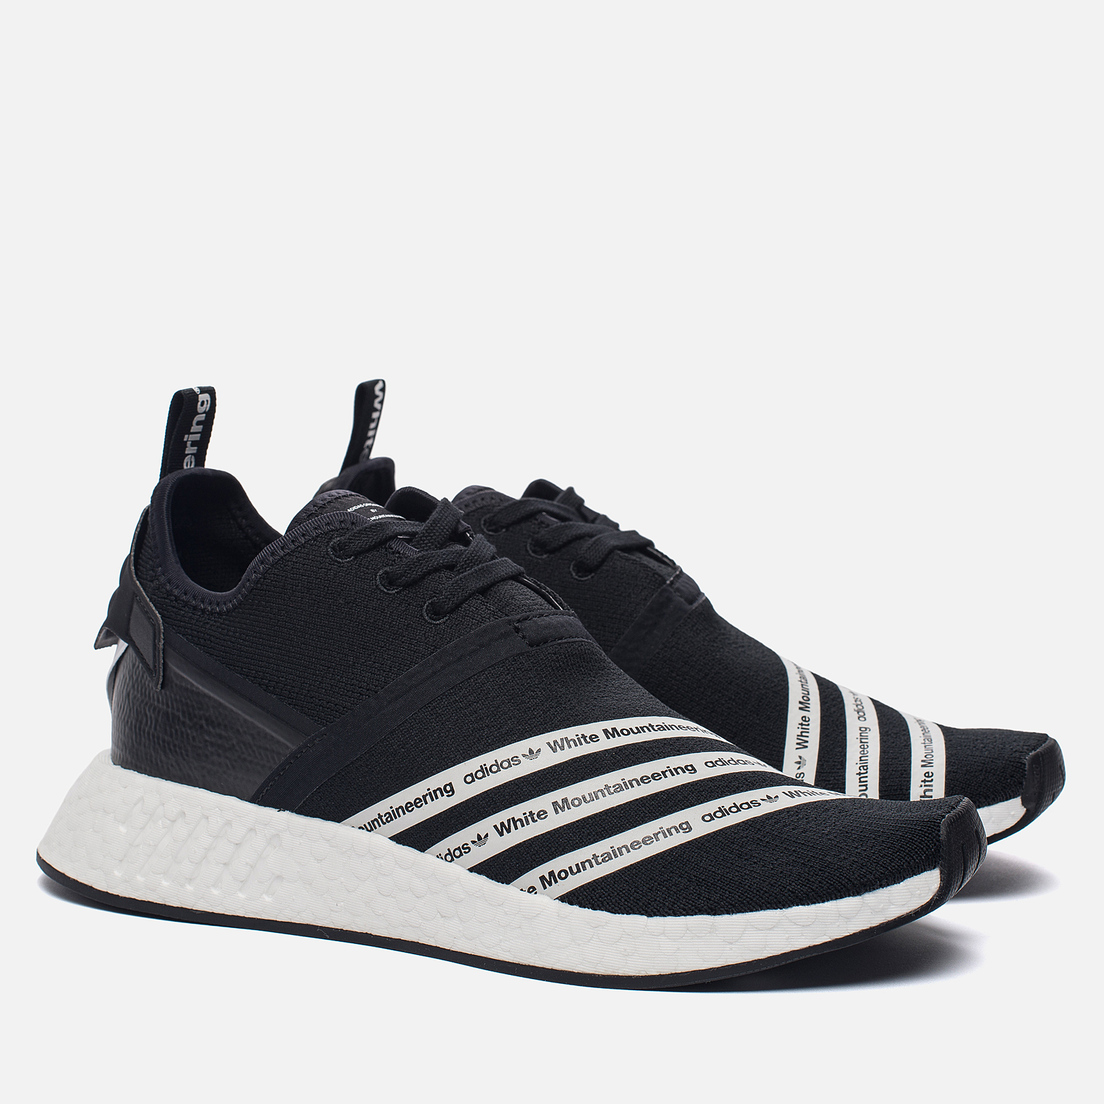 nmd white mountaineering